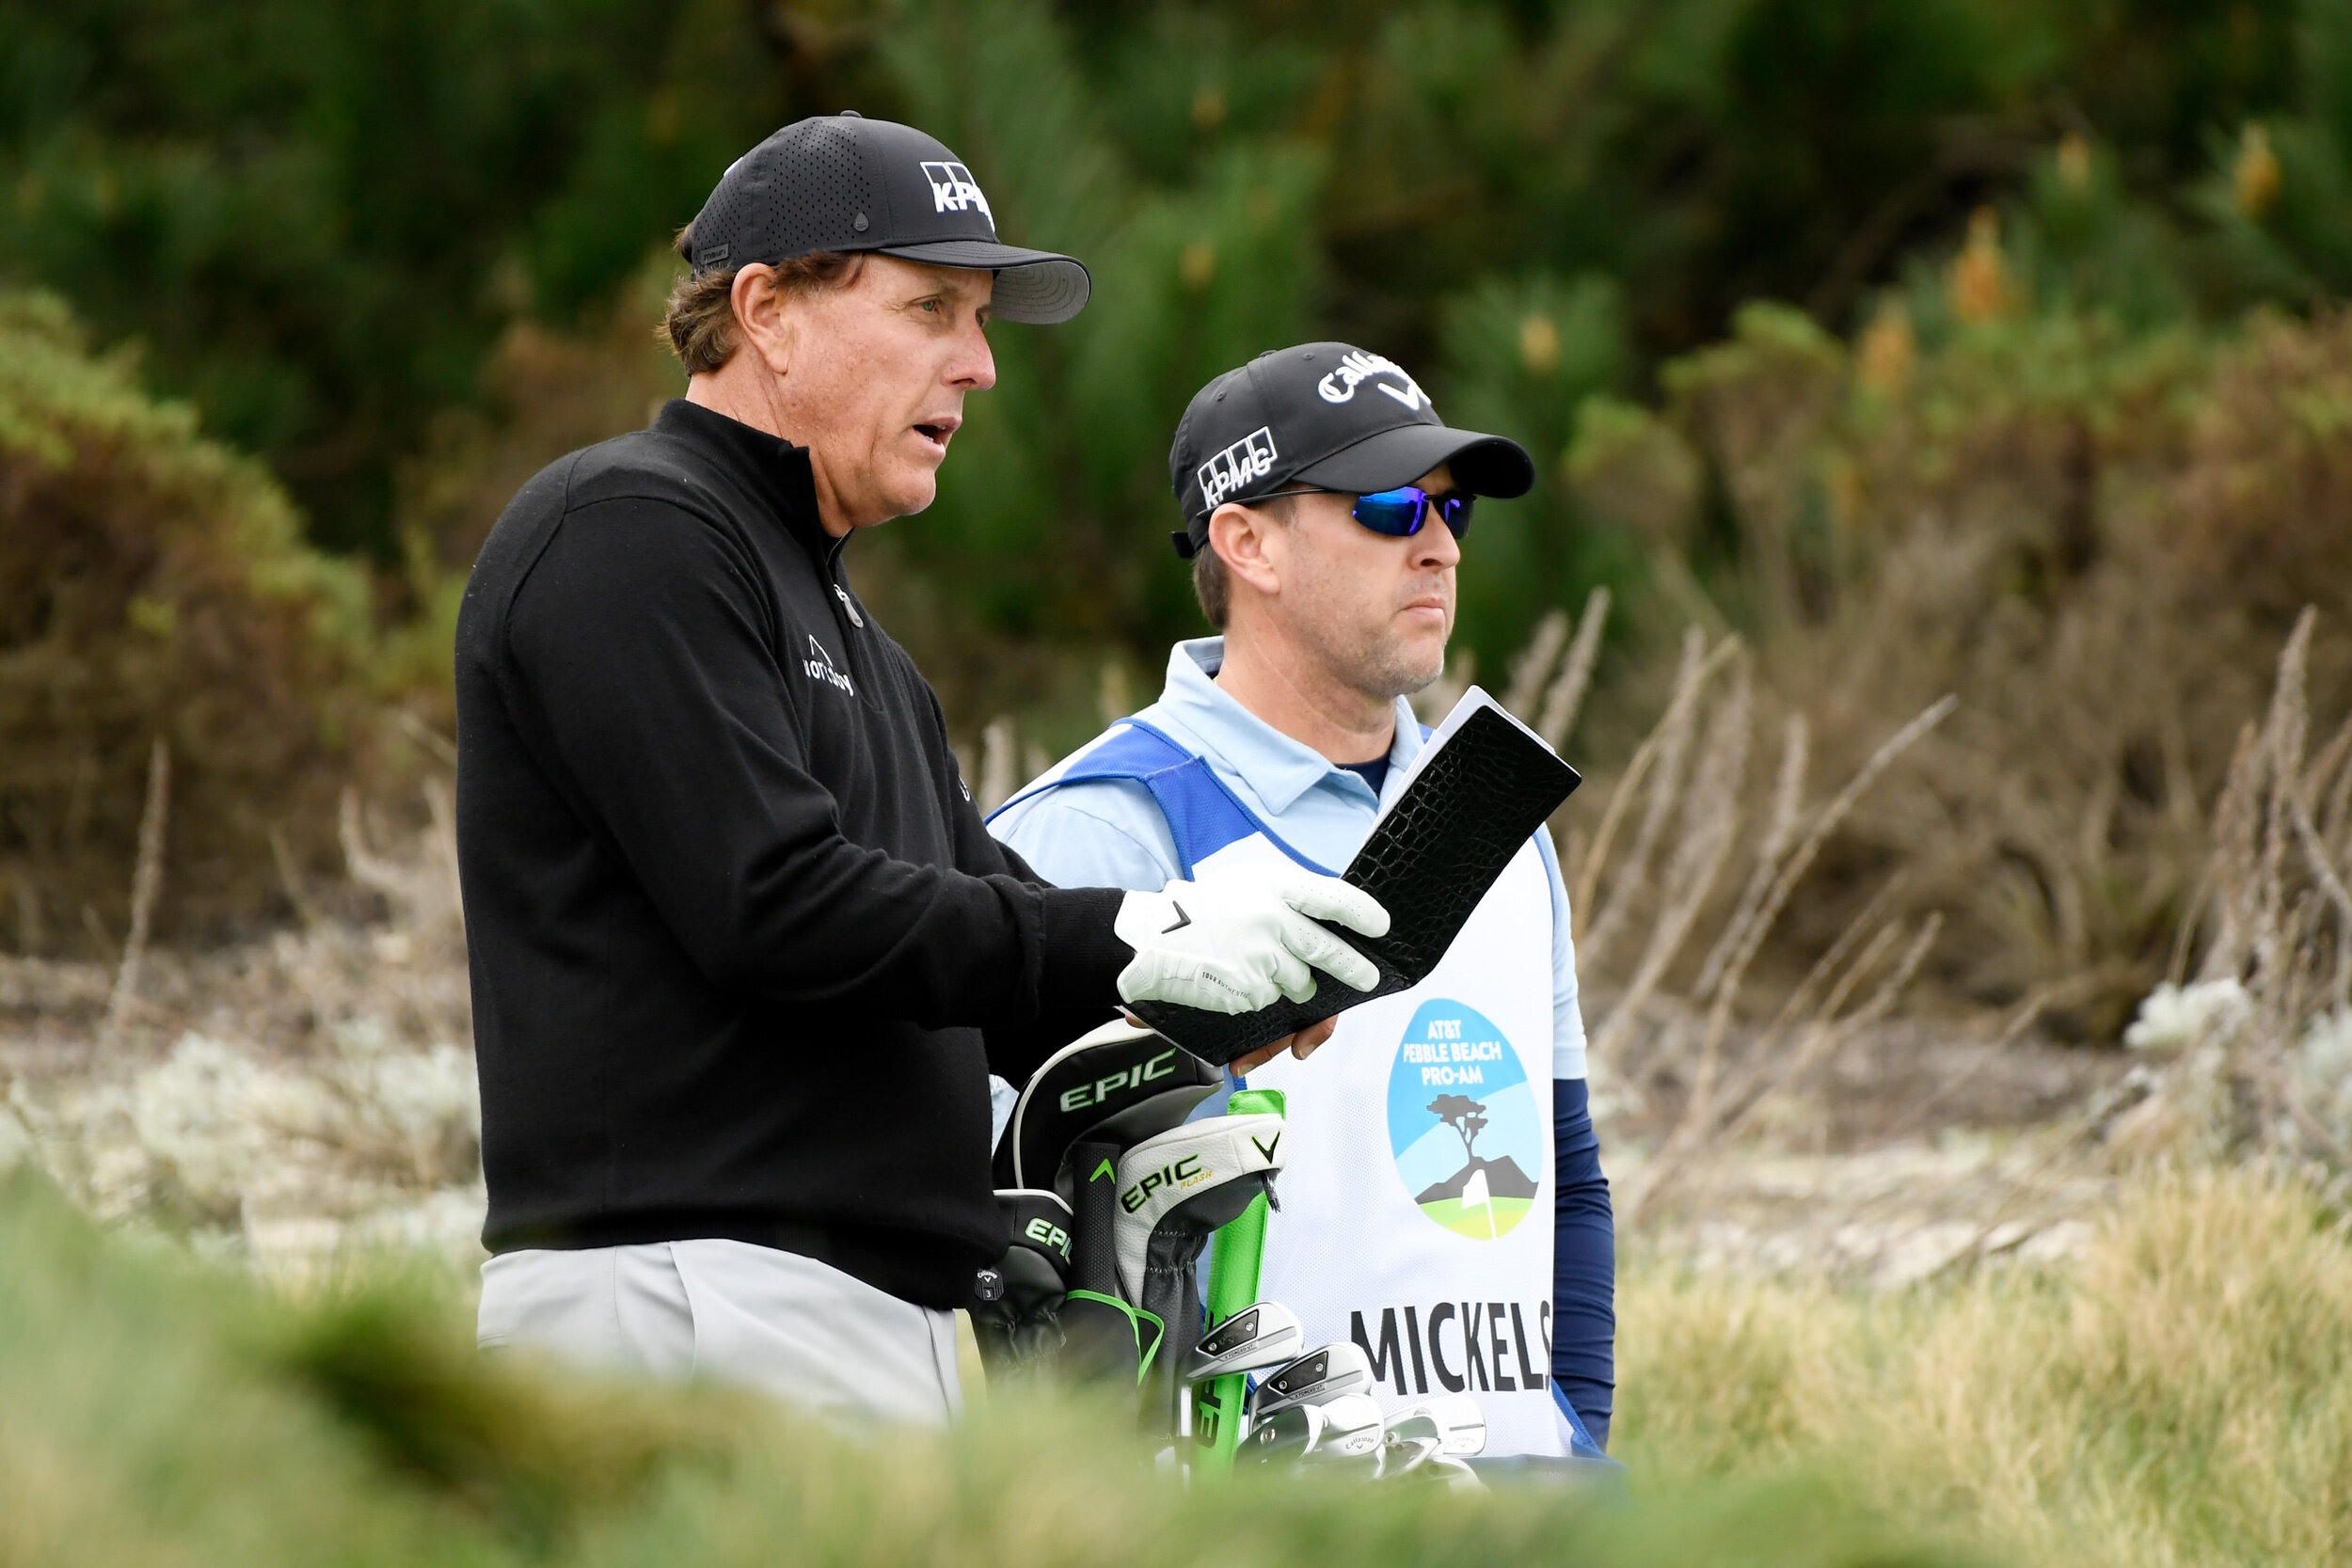  PEBBLE BEACH, CALIFORNIA - FEBRUARY 11: Phil Mickelson of the United States talks with his caddie and brother Tim Mickelson on the third hole during the first round of the AT&T Pebble Beach Pro-Am at Spyglass Hill Golf Course on February 11, 2021 in